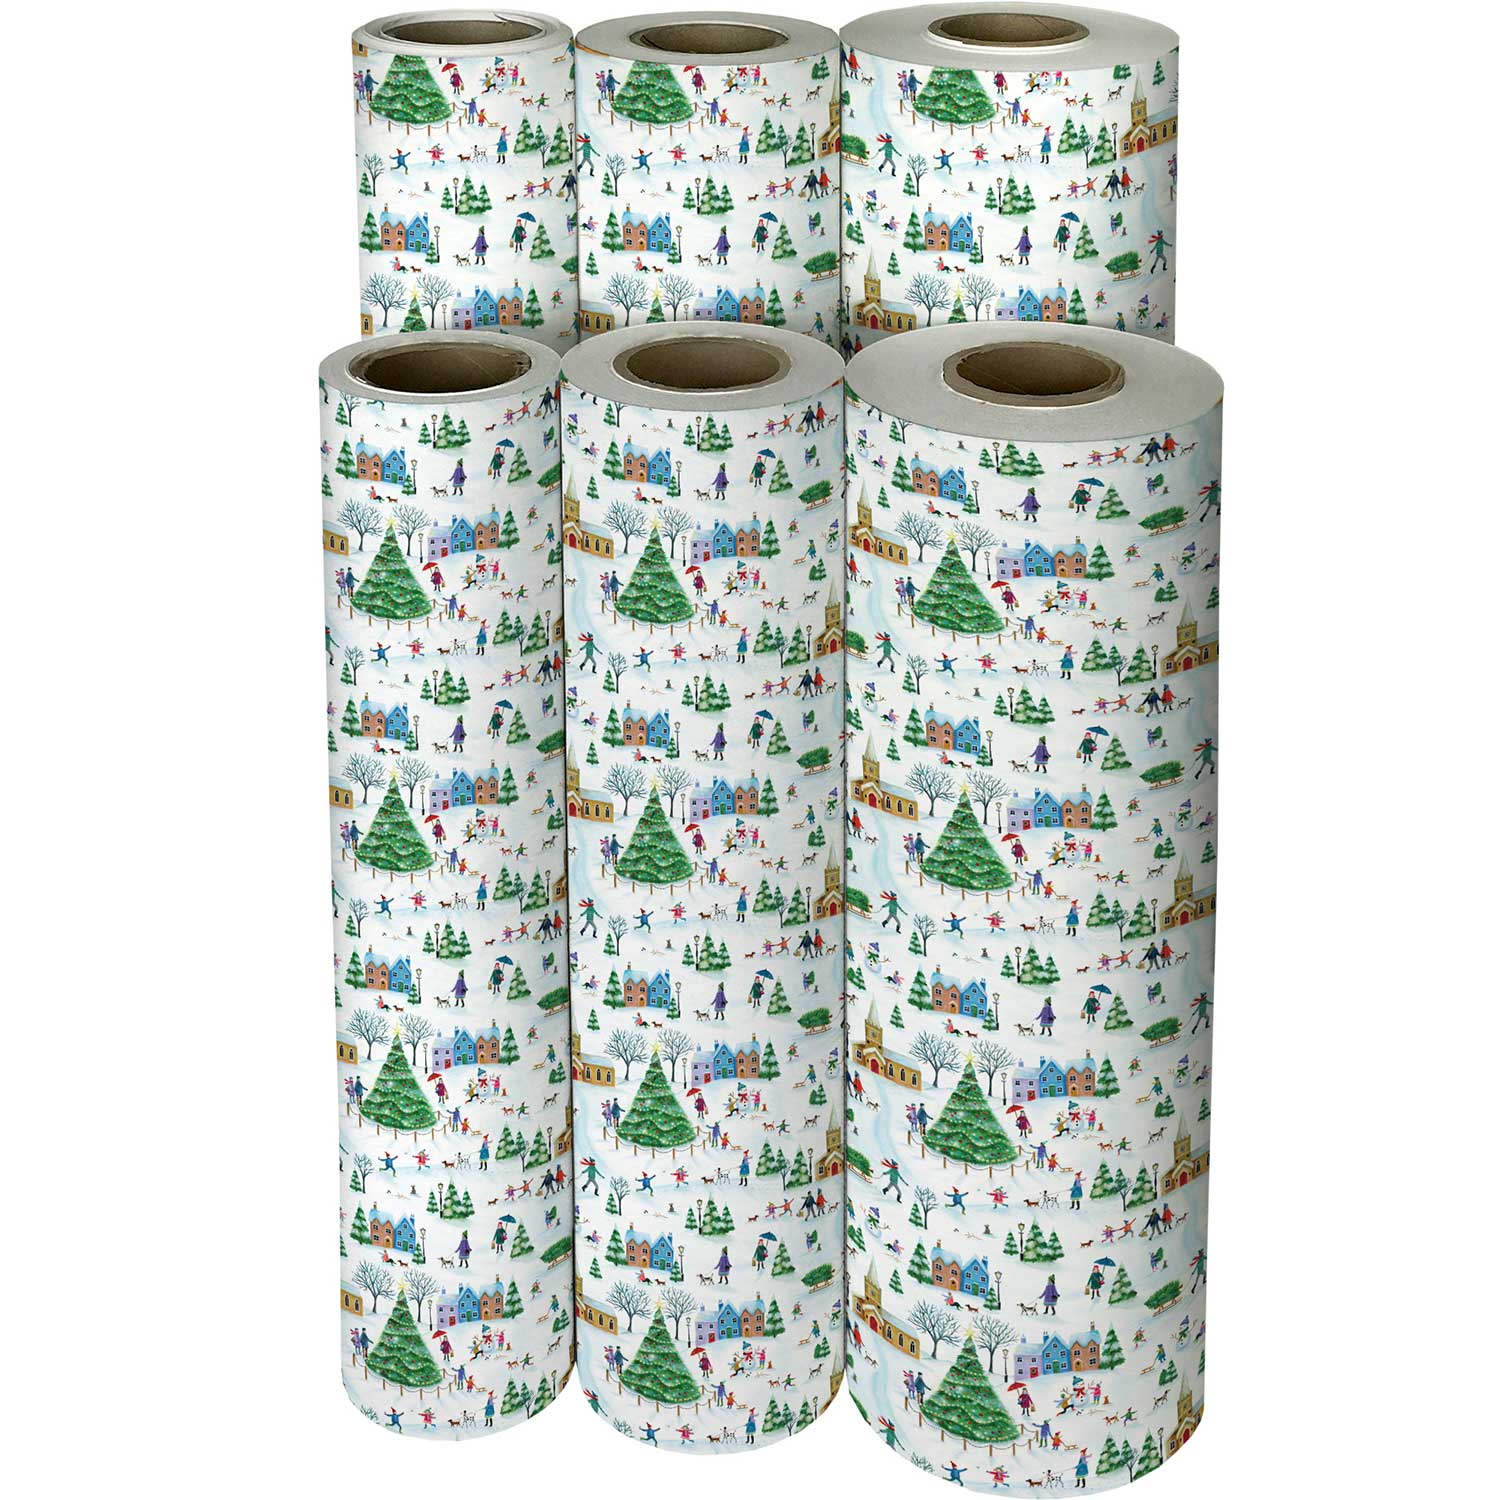 Village Town Christmas Gift Wrap Full Ream 833 ft x 30 in